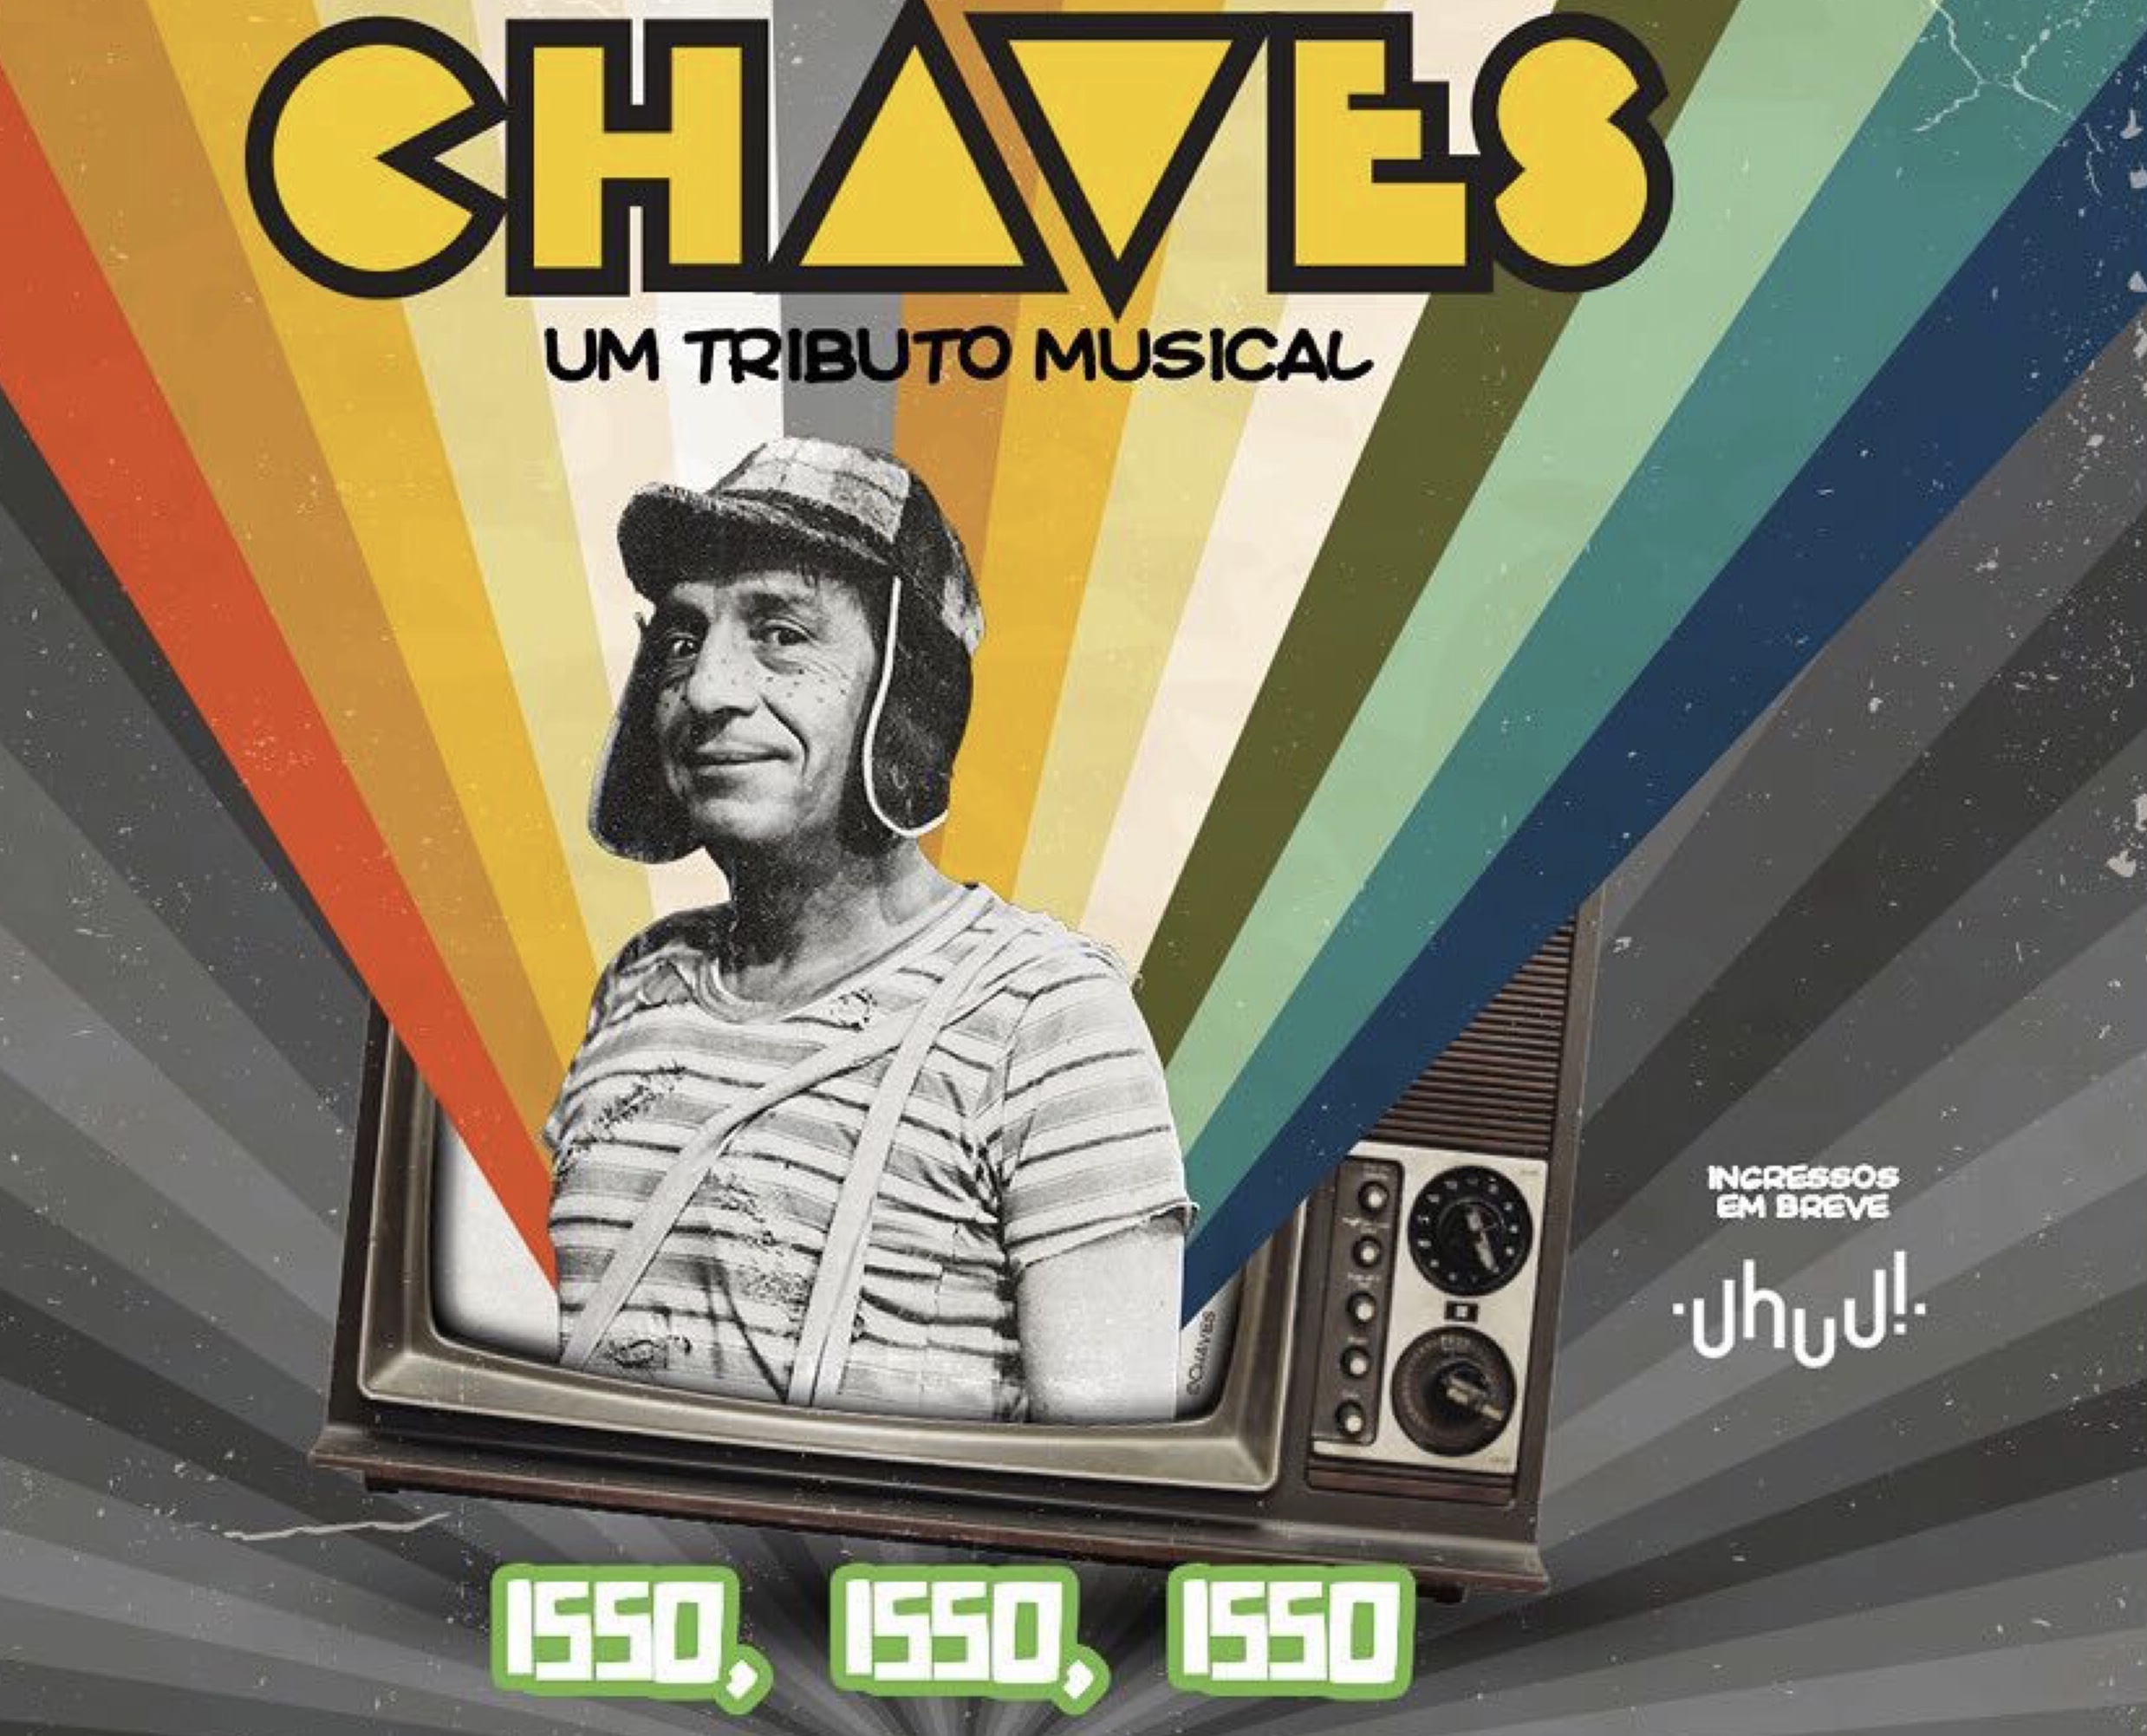 Chaves - Musical